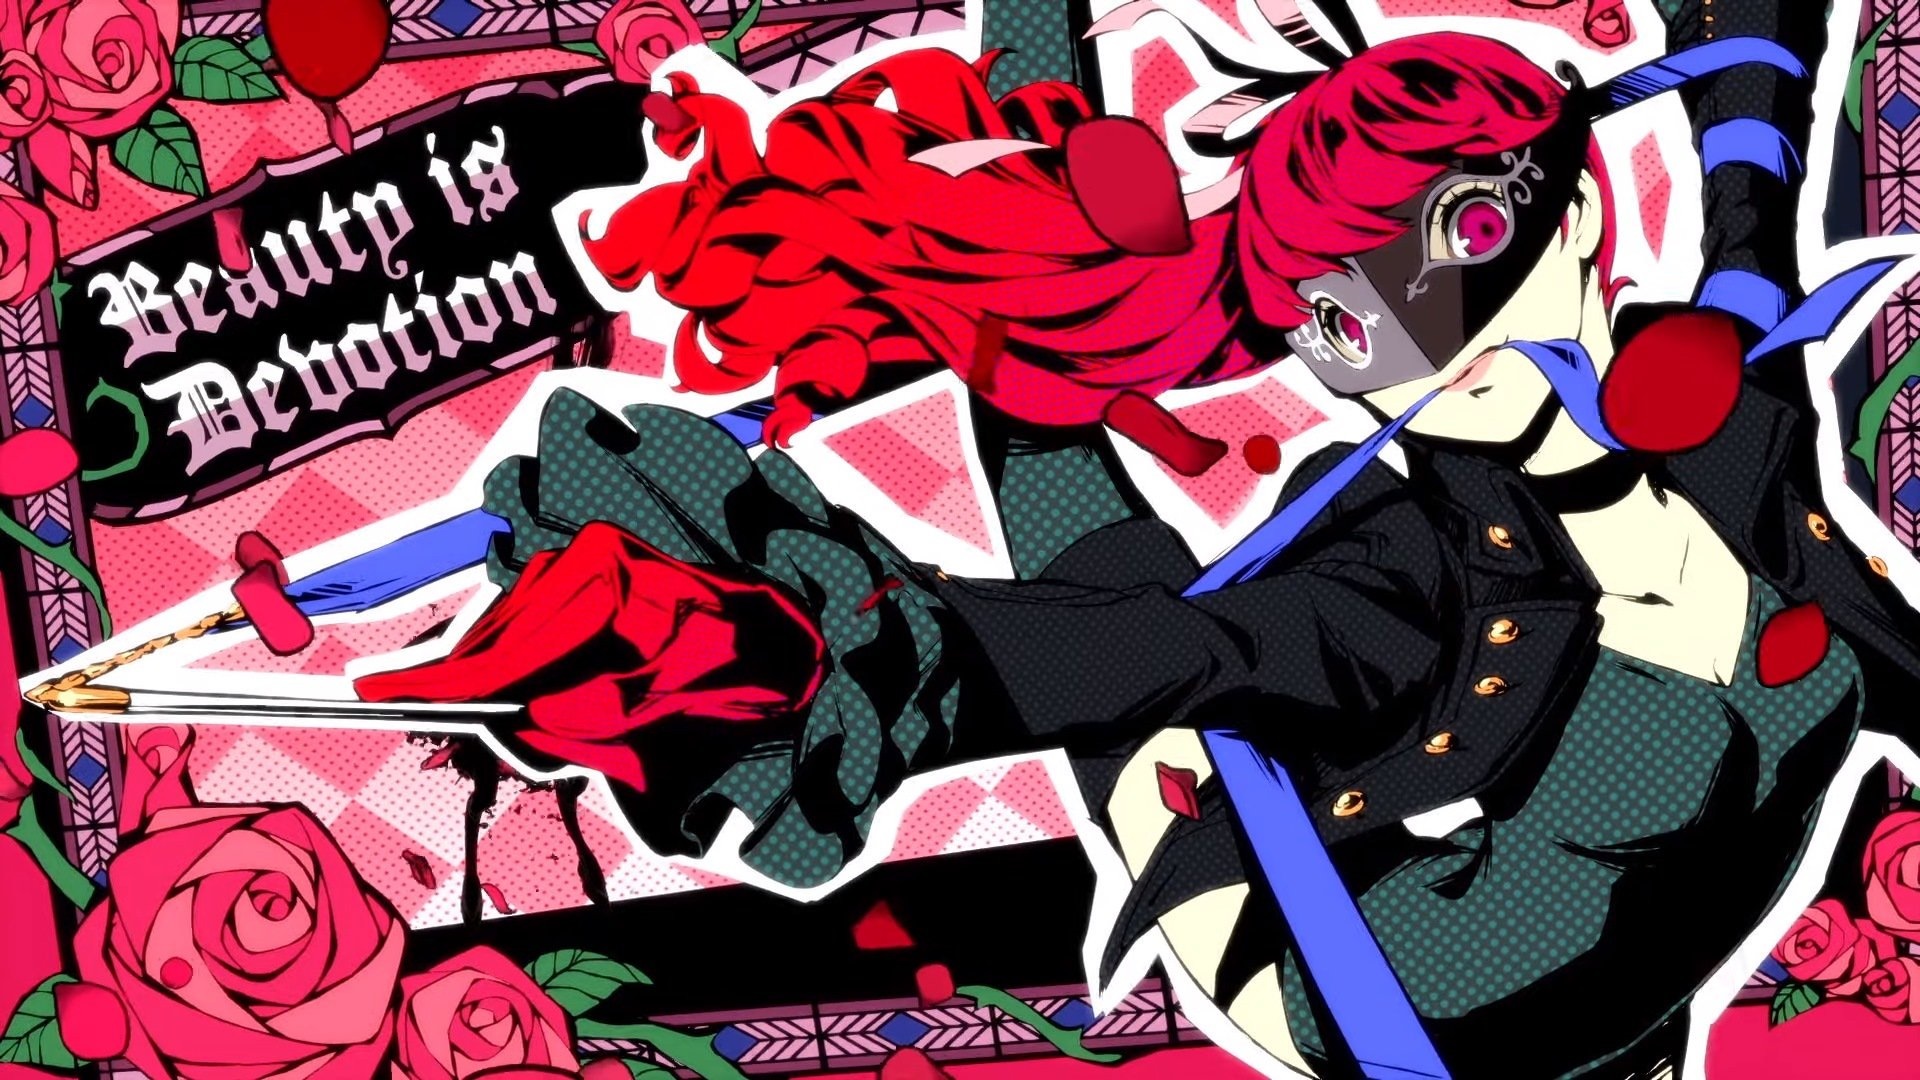 Persona 5 Royal Switch release date, trailer, and more